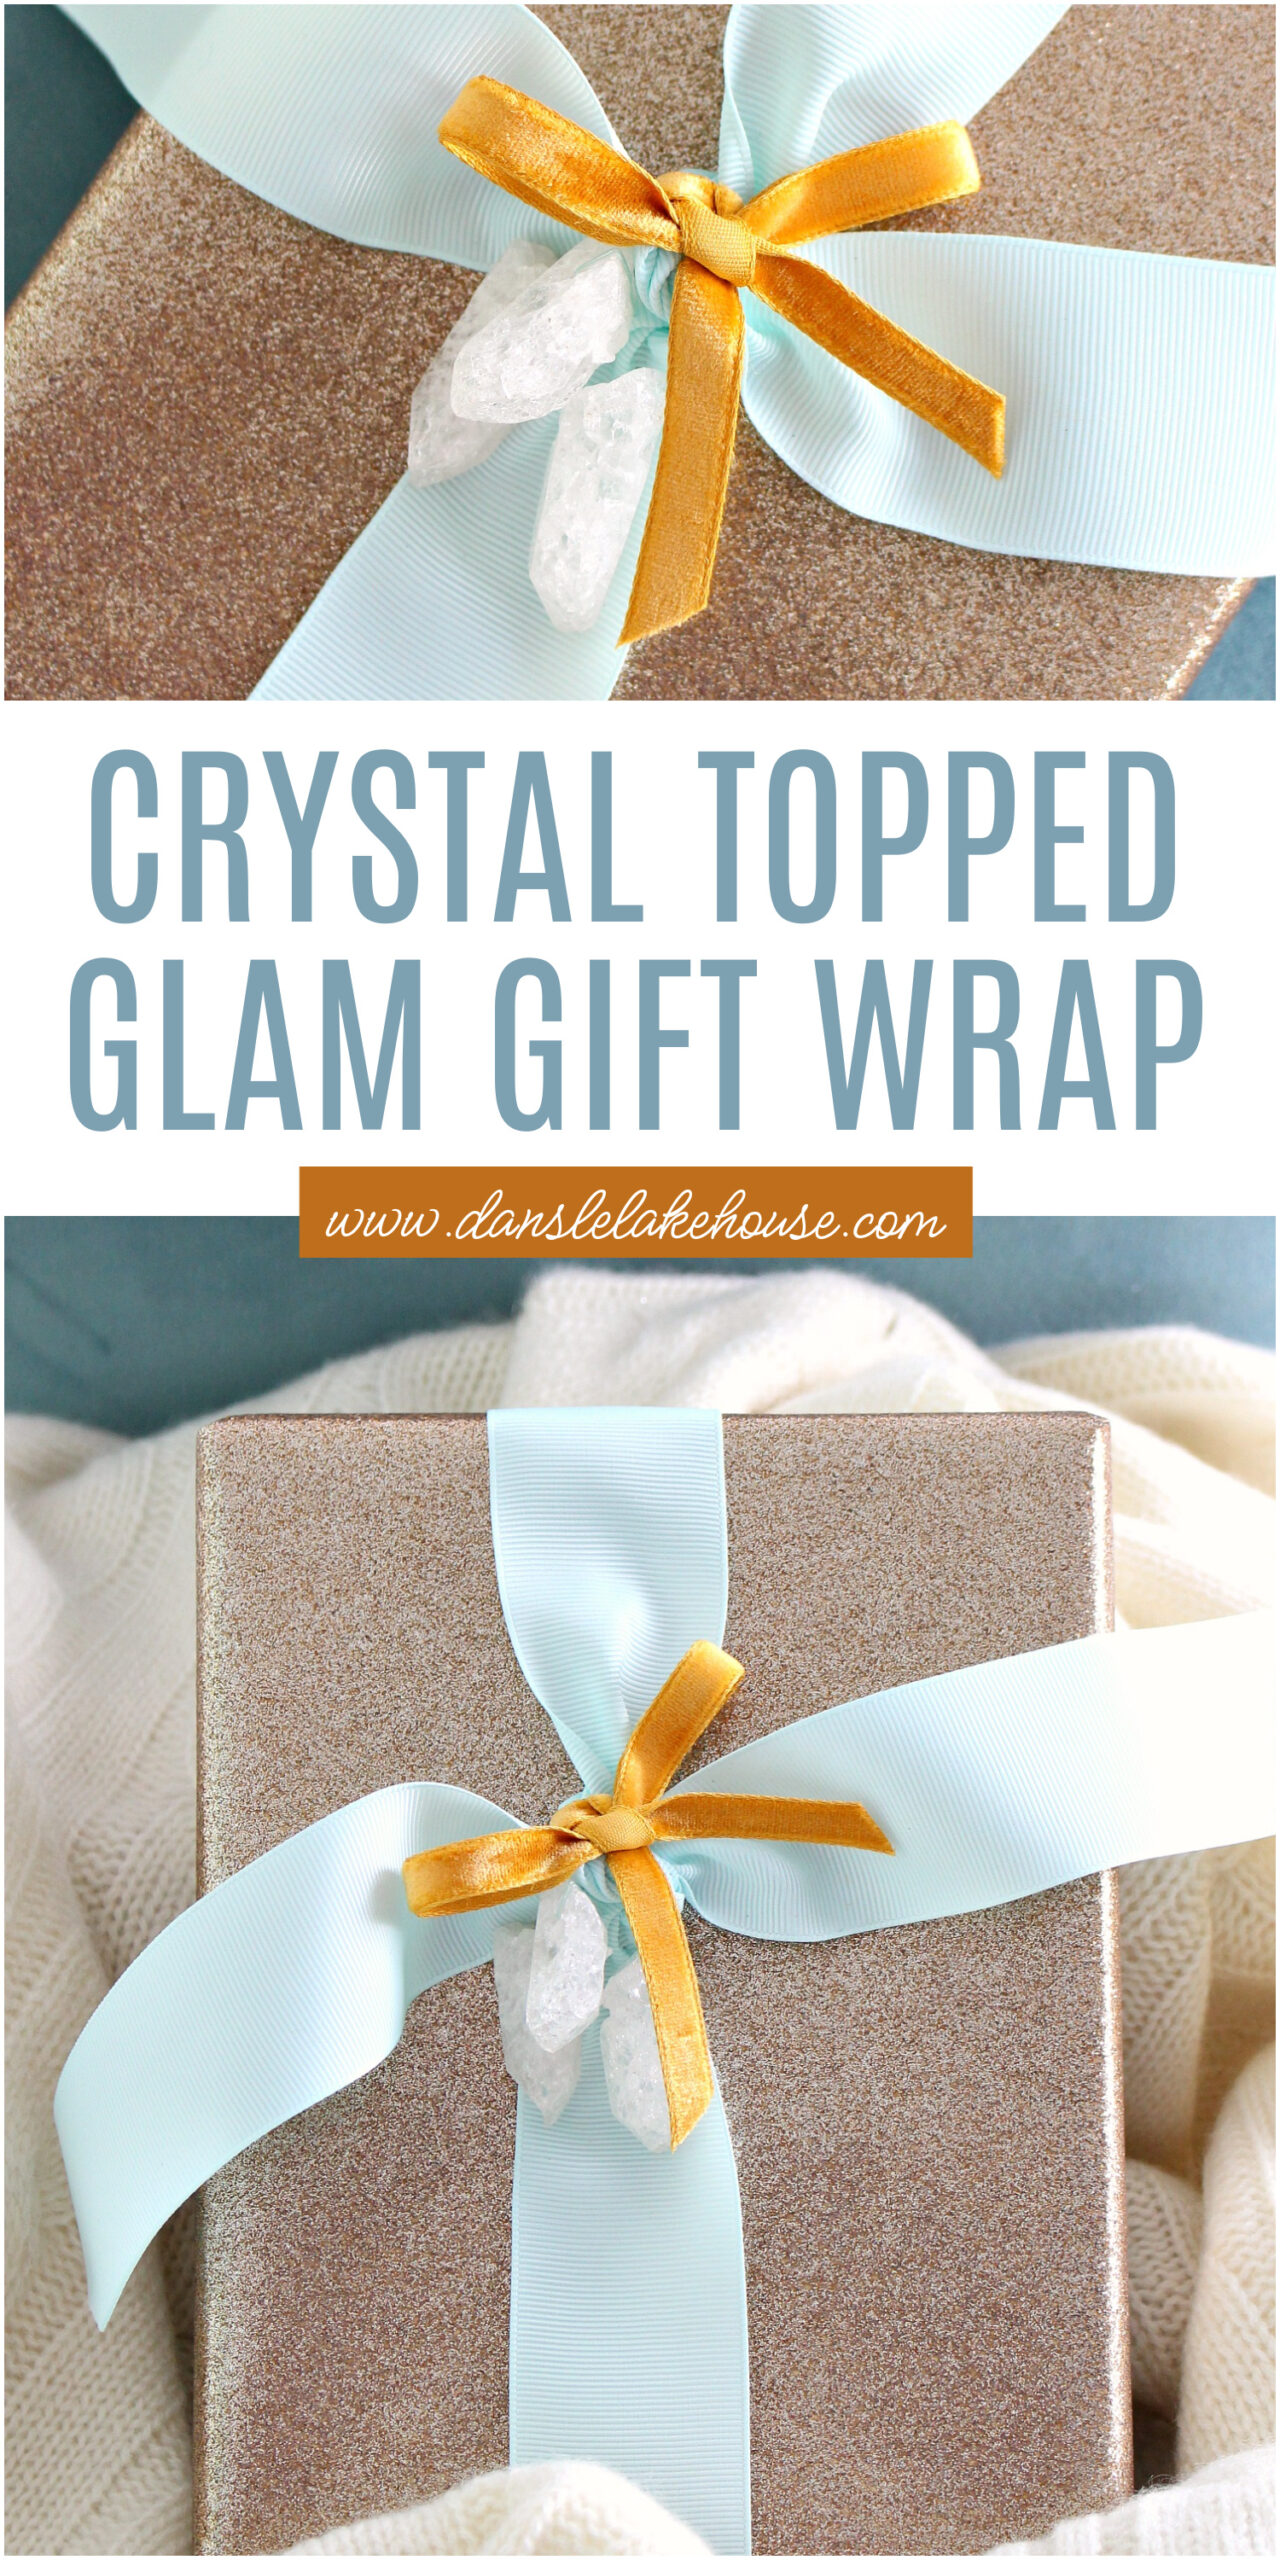 Crystal Topped Glam Gift Wrap